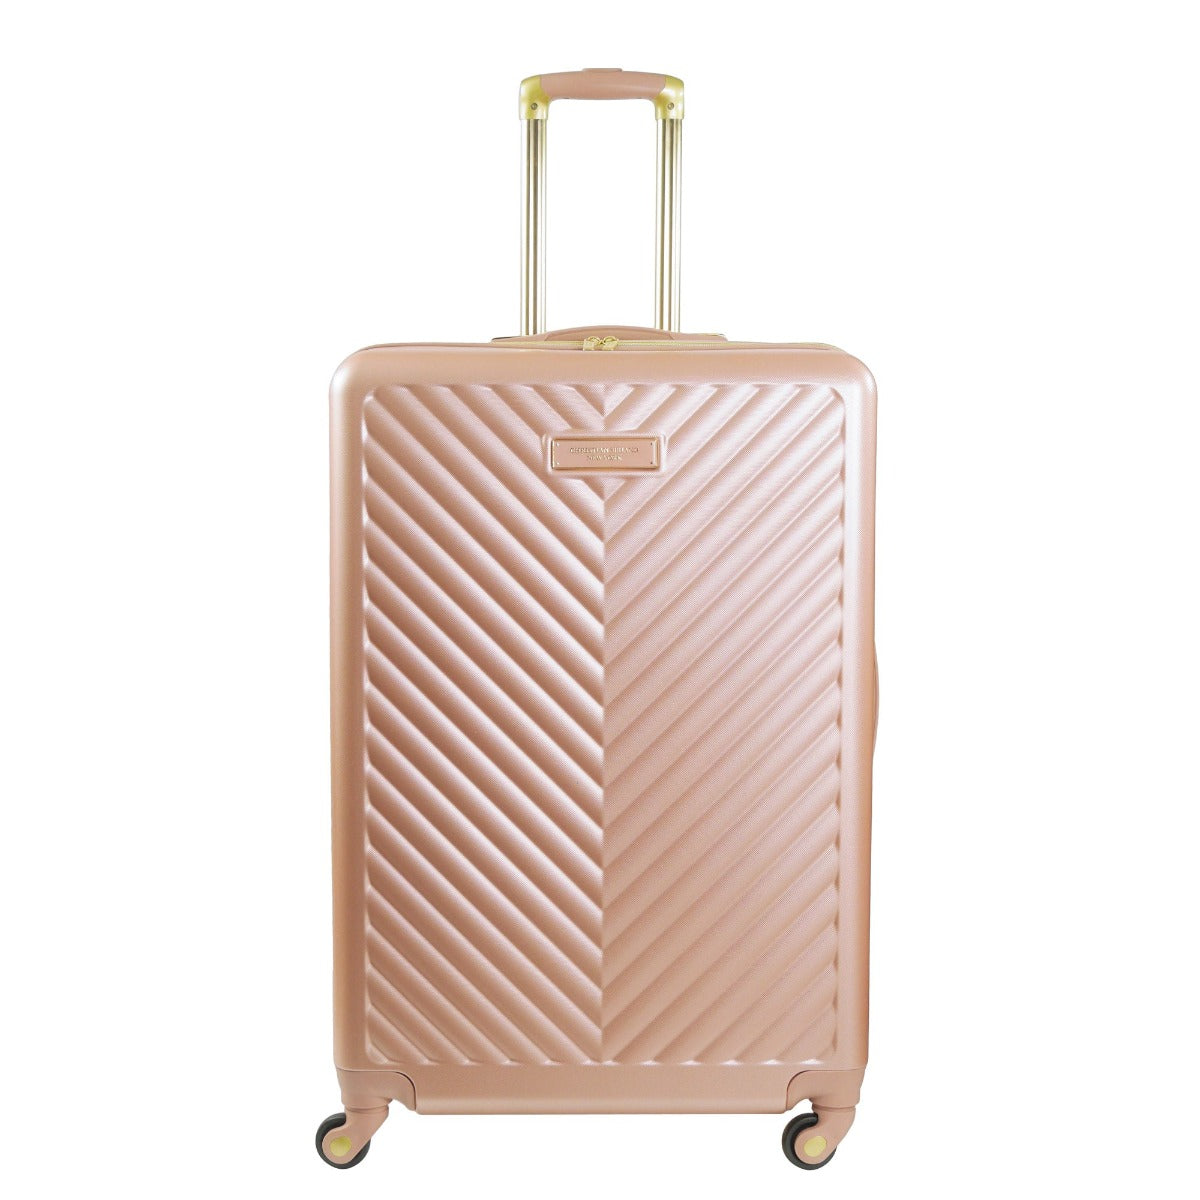 Christian Siriano Addie 29" checked luggage hardside spinner suitcase rose gold - best durable checked luggage